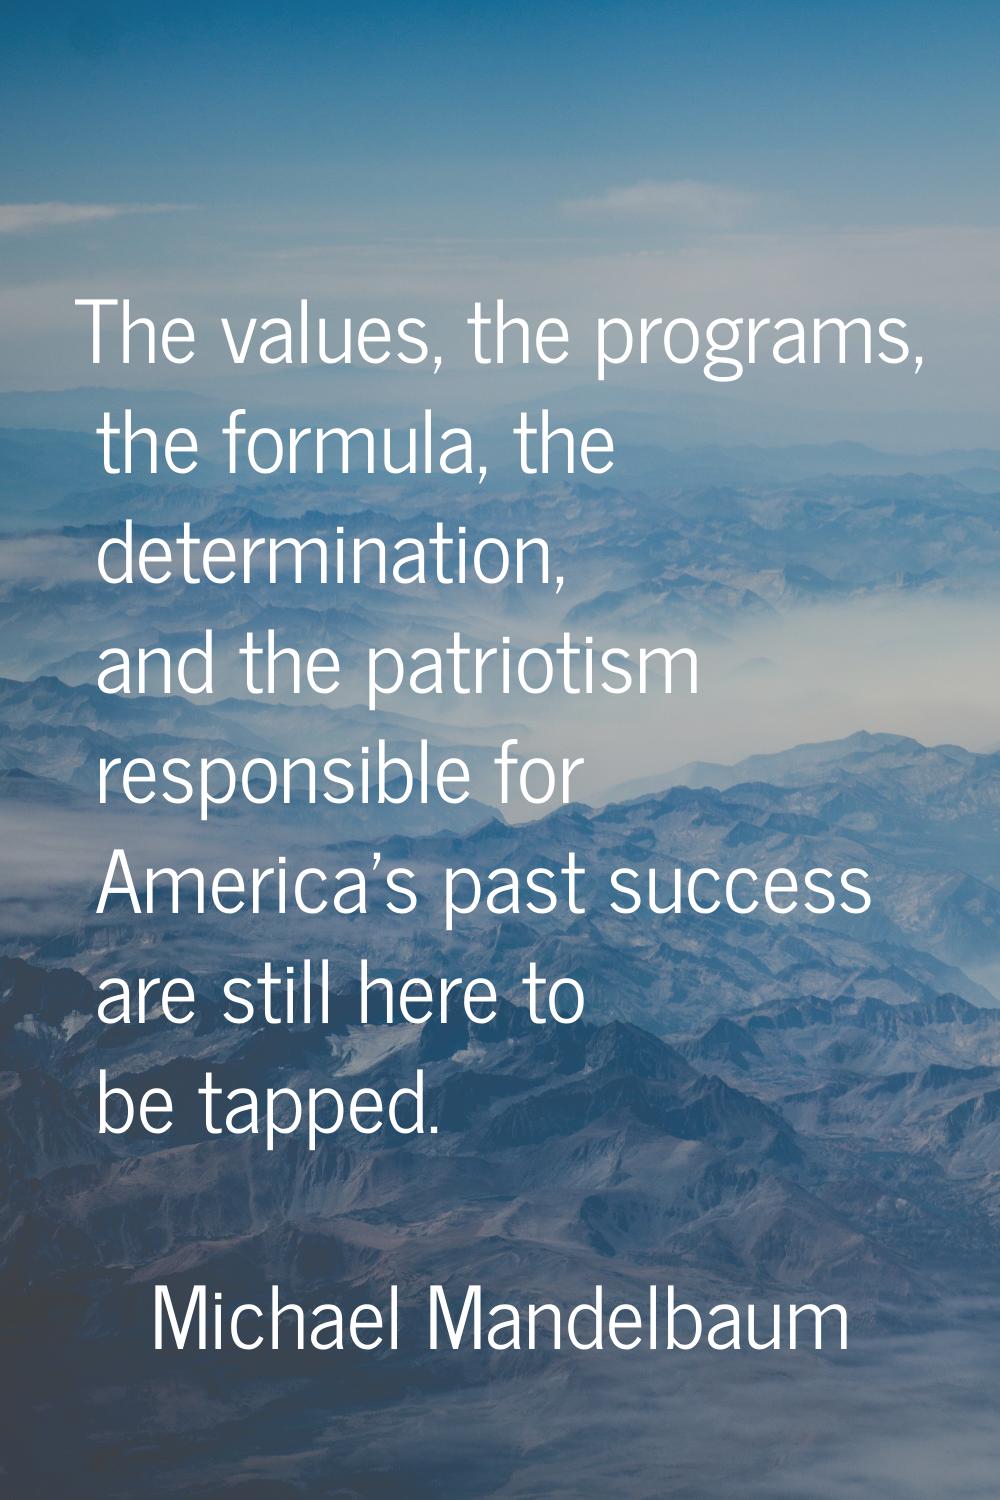 The values, the programs, the formula, the determination, and the patriotism responsible for Americ